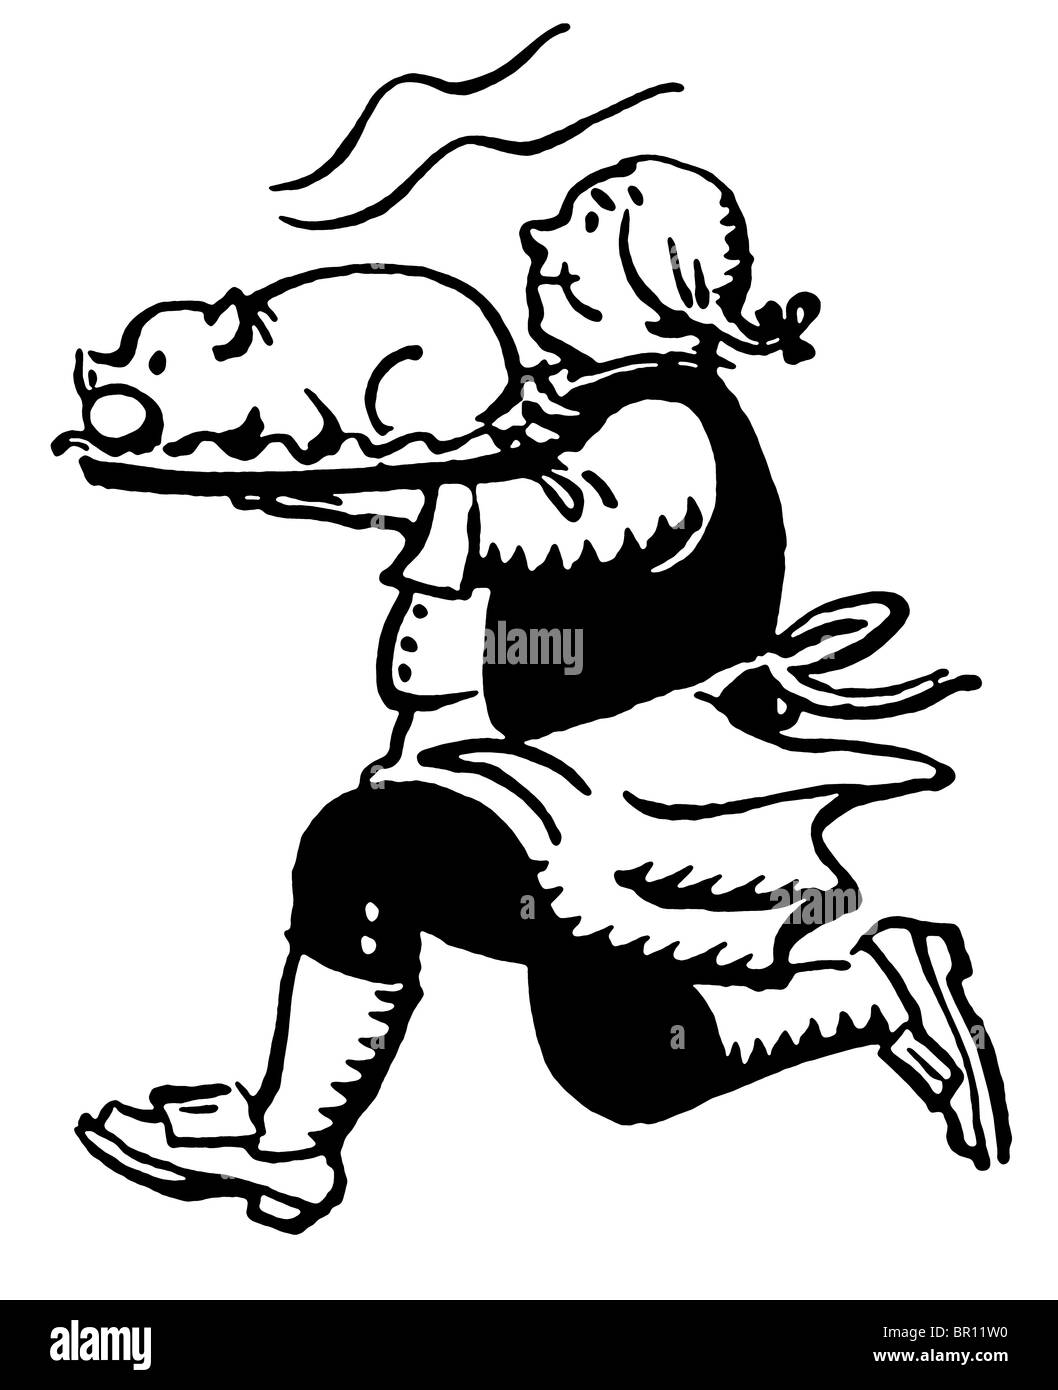 A black and white version of a vintage print of a man running with a roasted pig Stock Photo